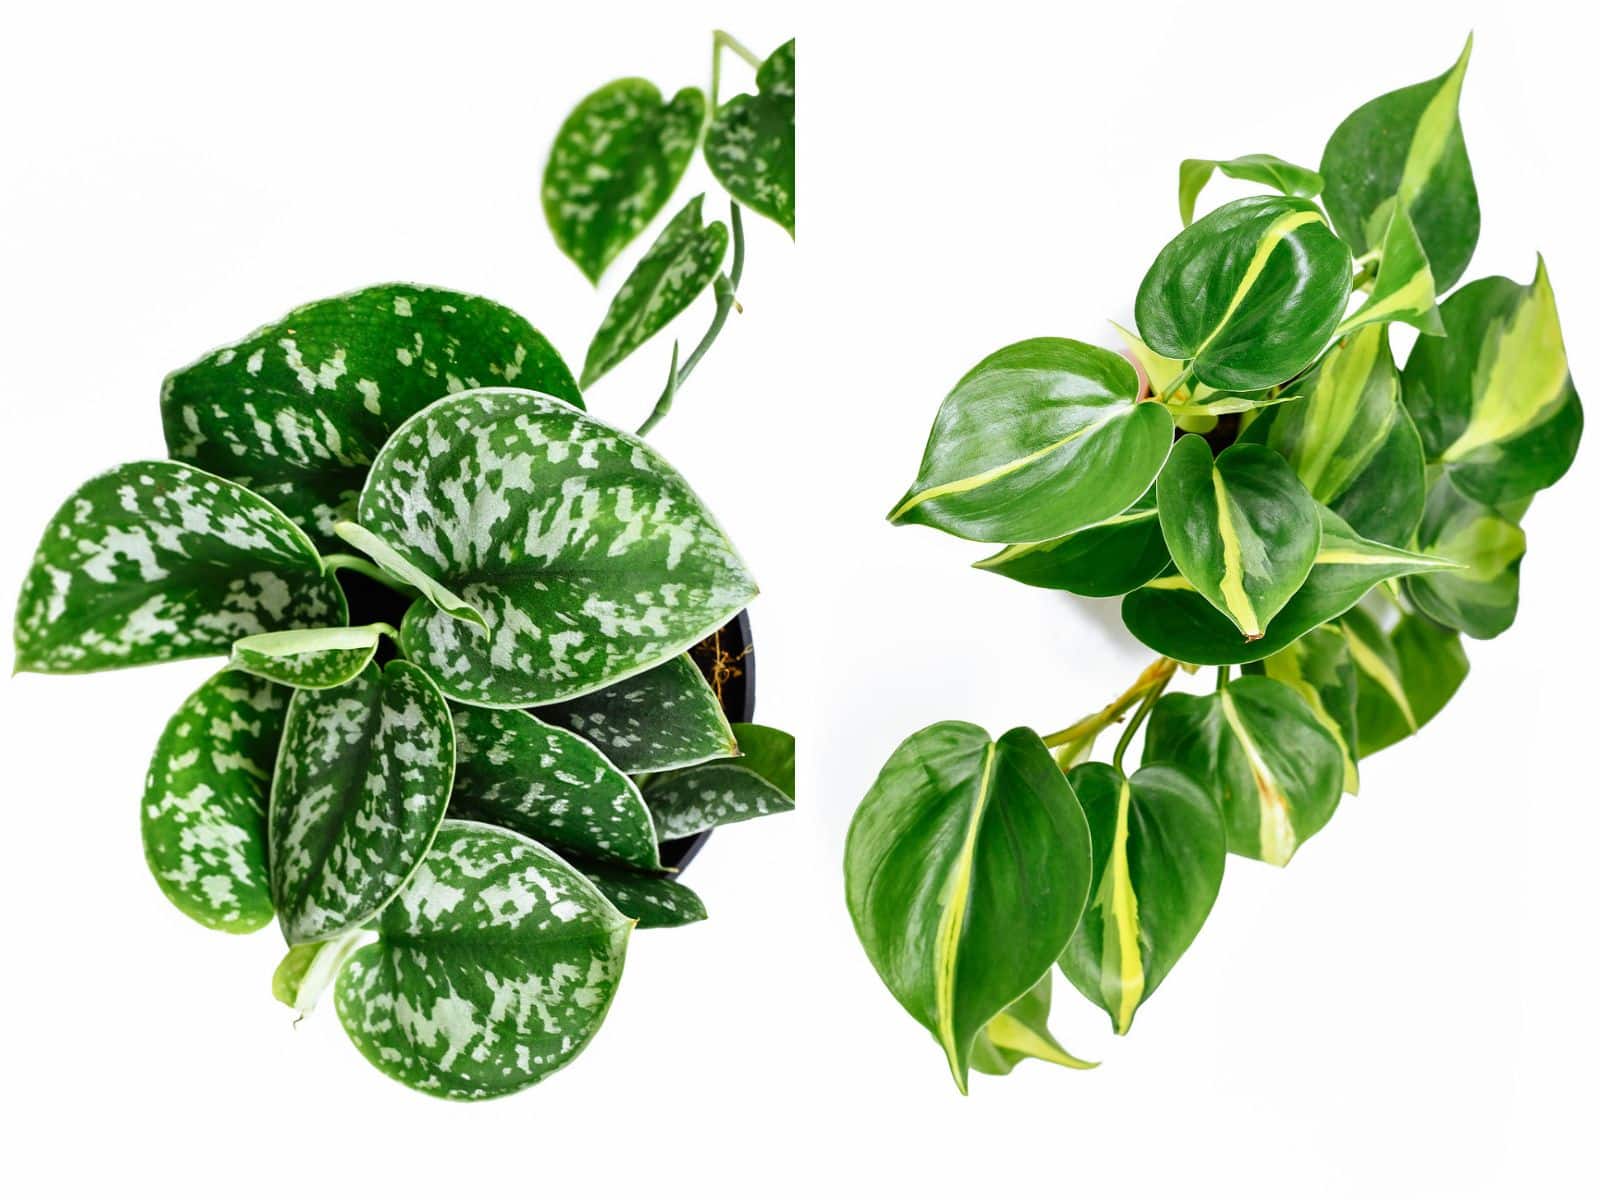 Side by side comparison of satin Pothos (left) and heart leaf Philodendron (right)